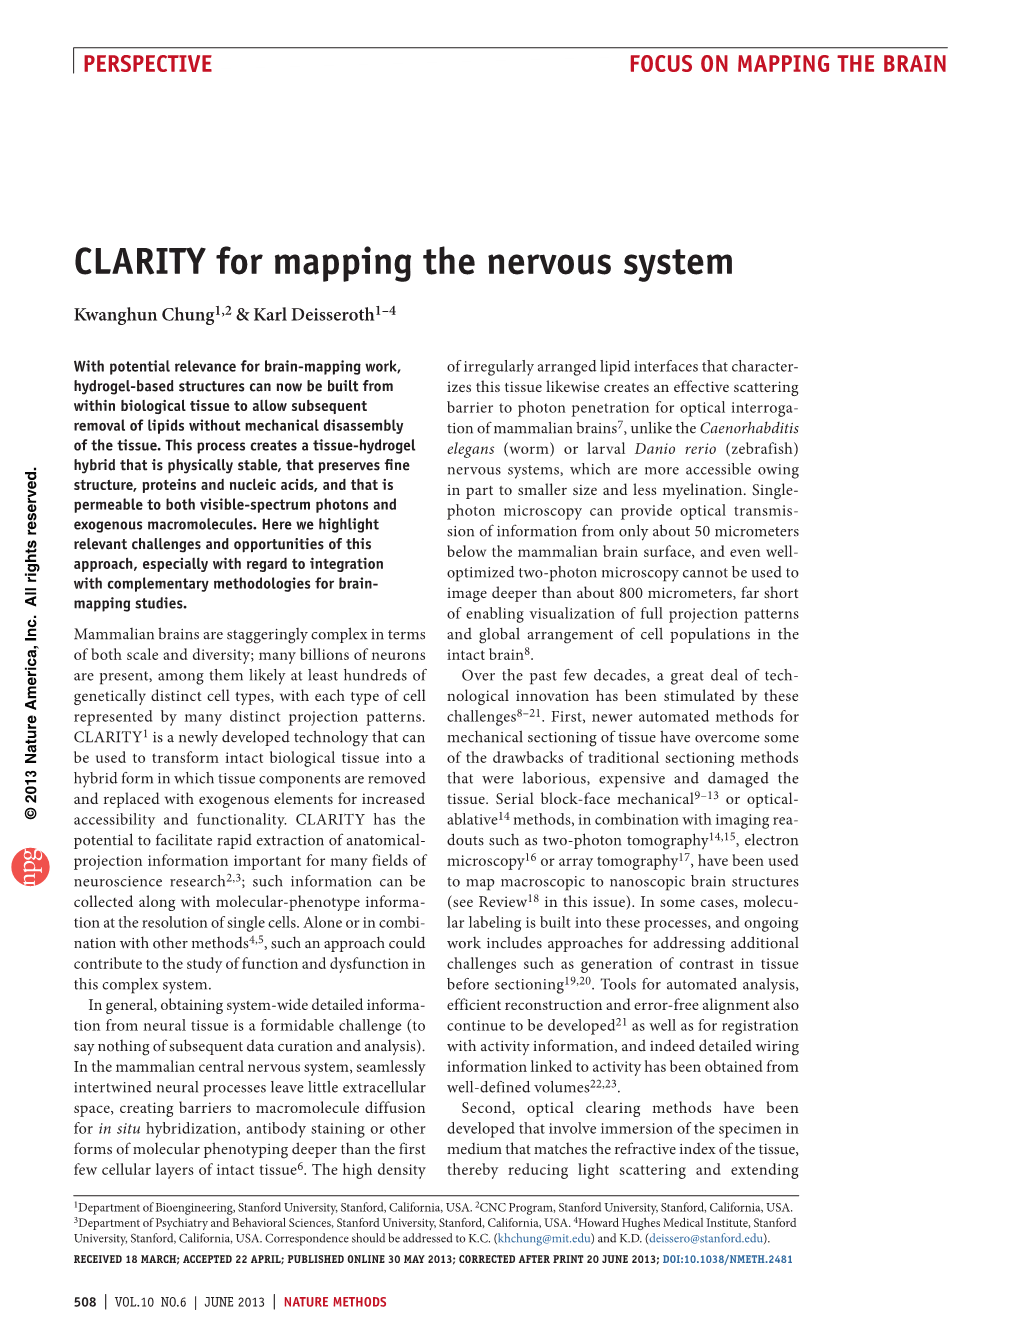 Clarity for Mapping the Nervous System